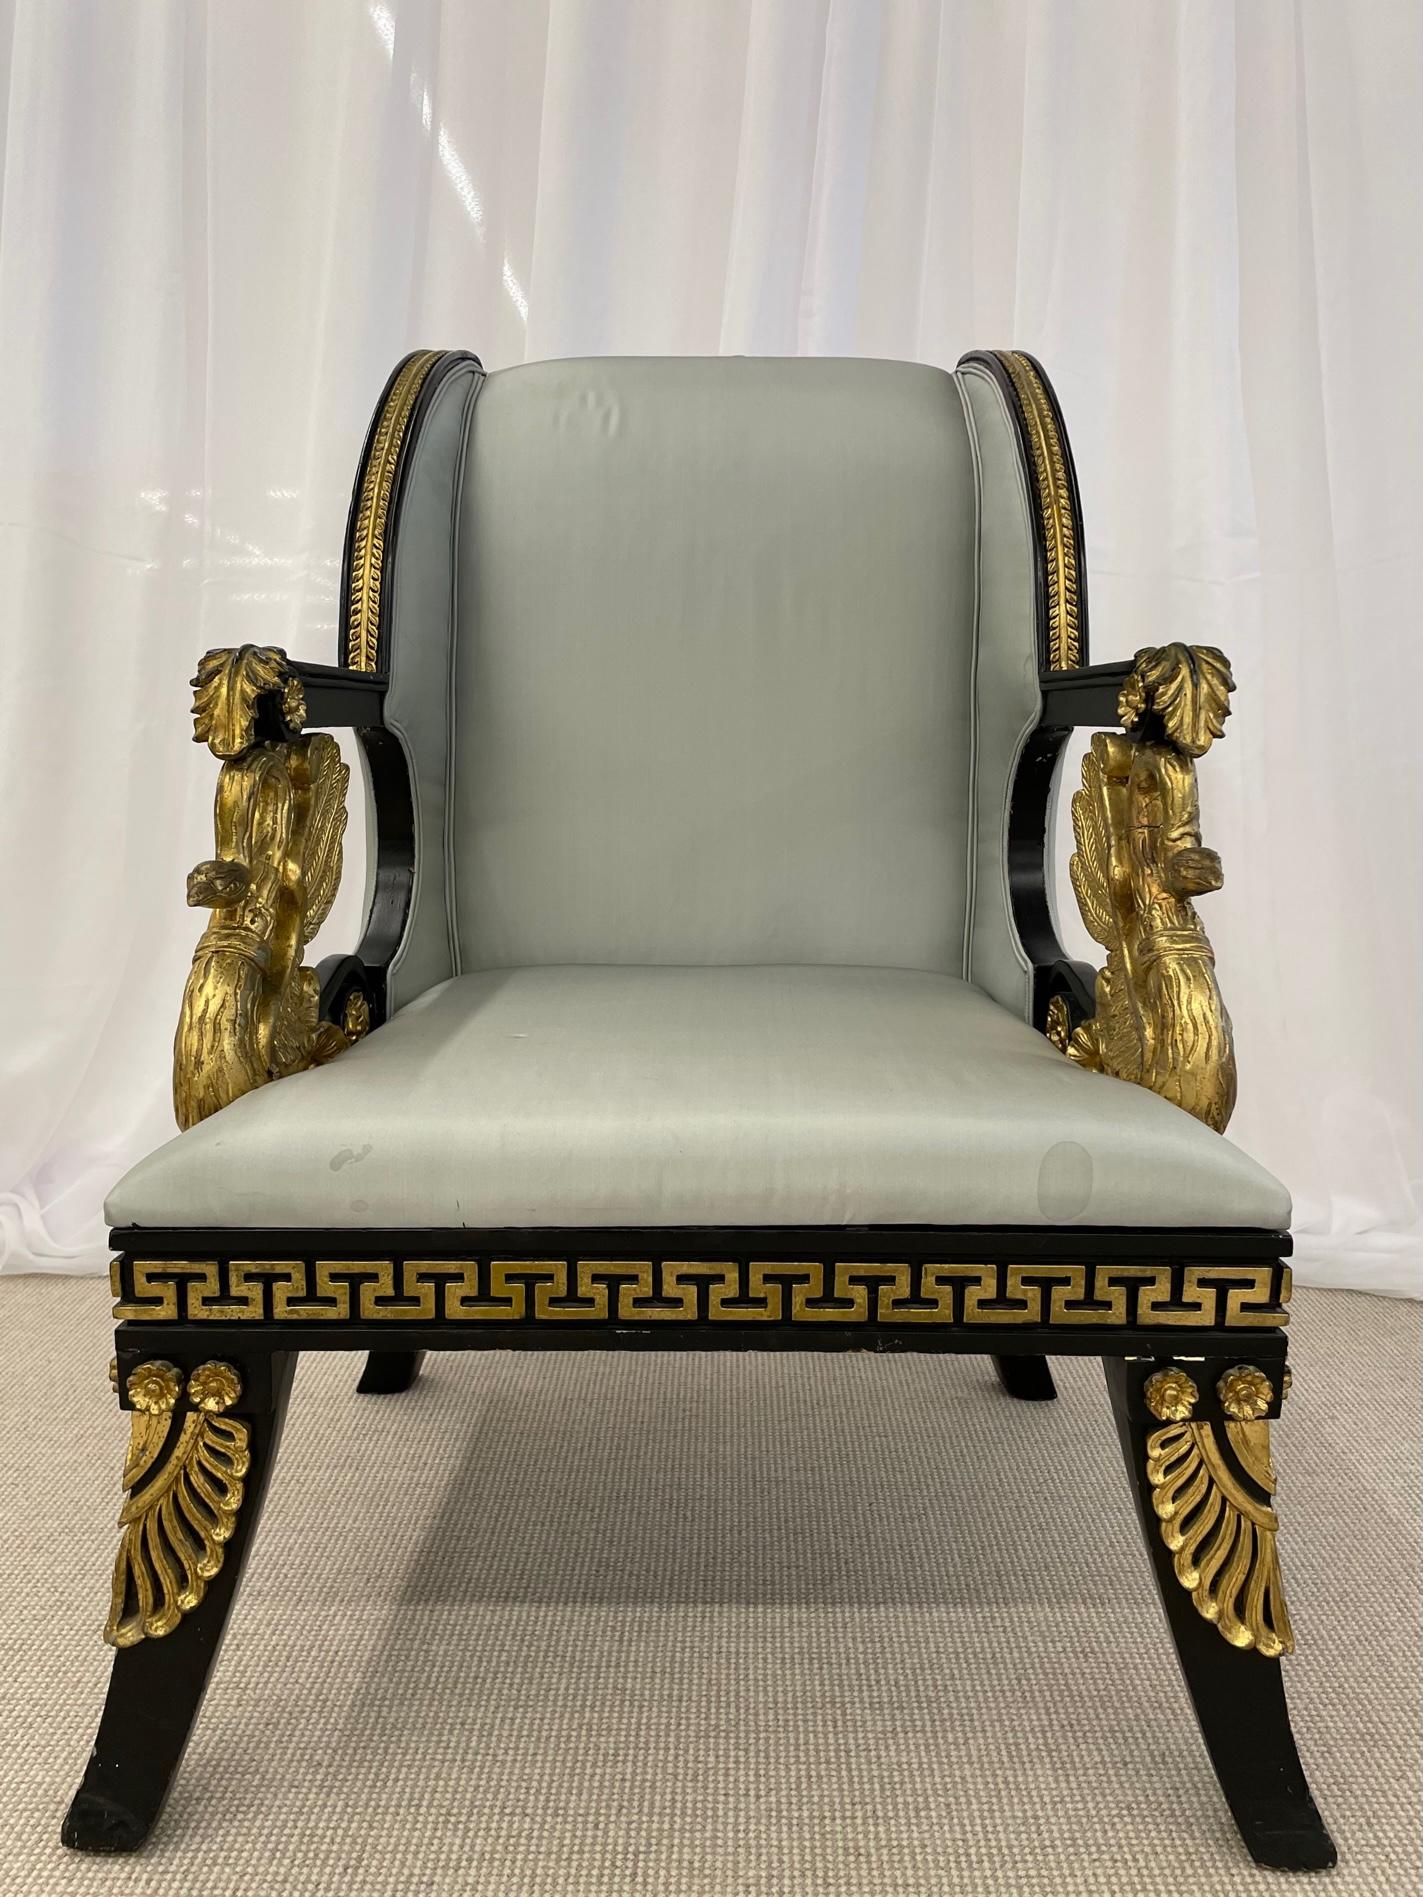 Hollywood Regency style throne, lounge, chair

A fine ebonized and parcel gilt decorated throne or lounge chair having Greek key design. The arm rests supported by wonderfully carved, full-bodied, winged Swan.